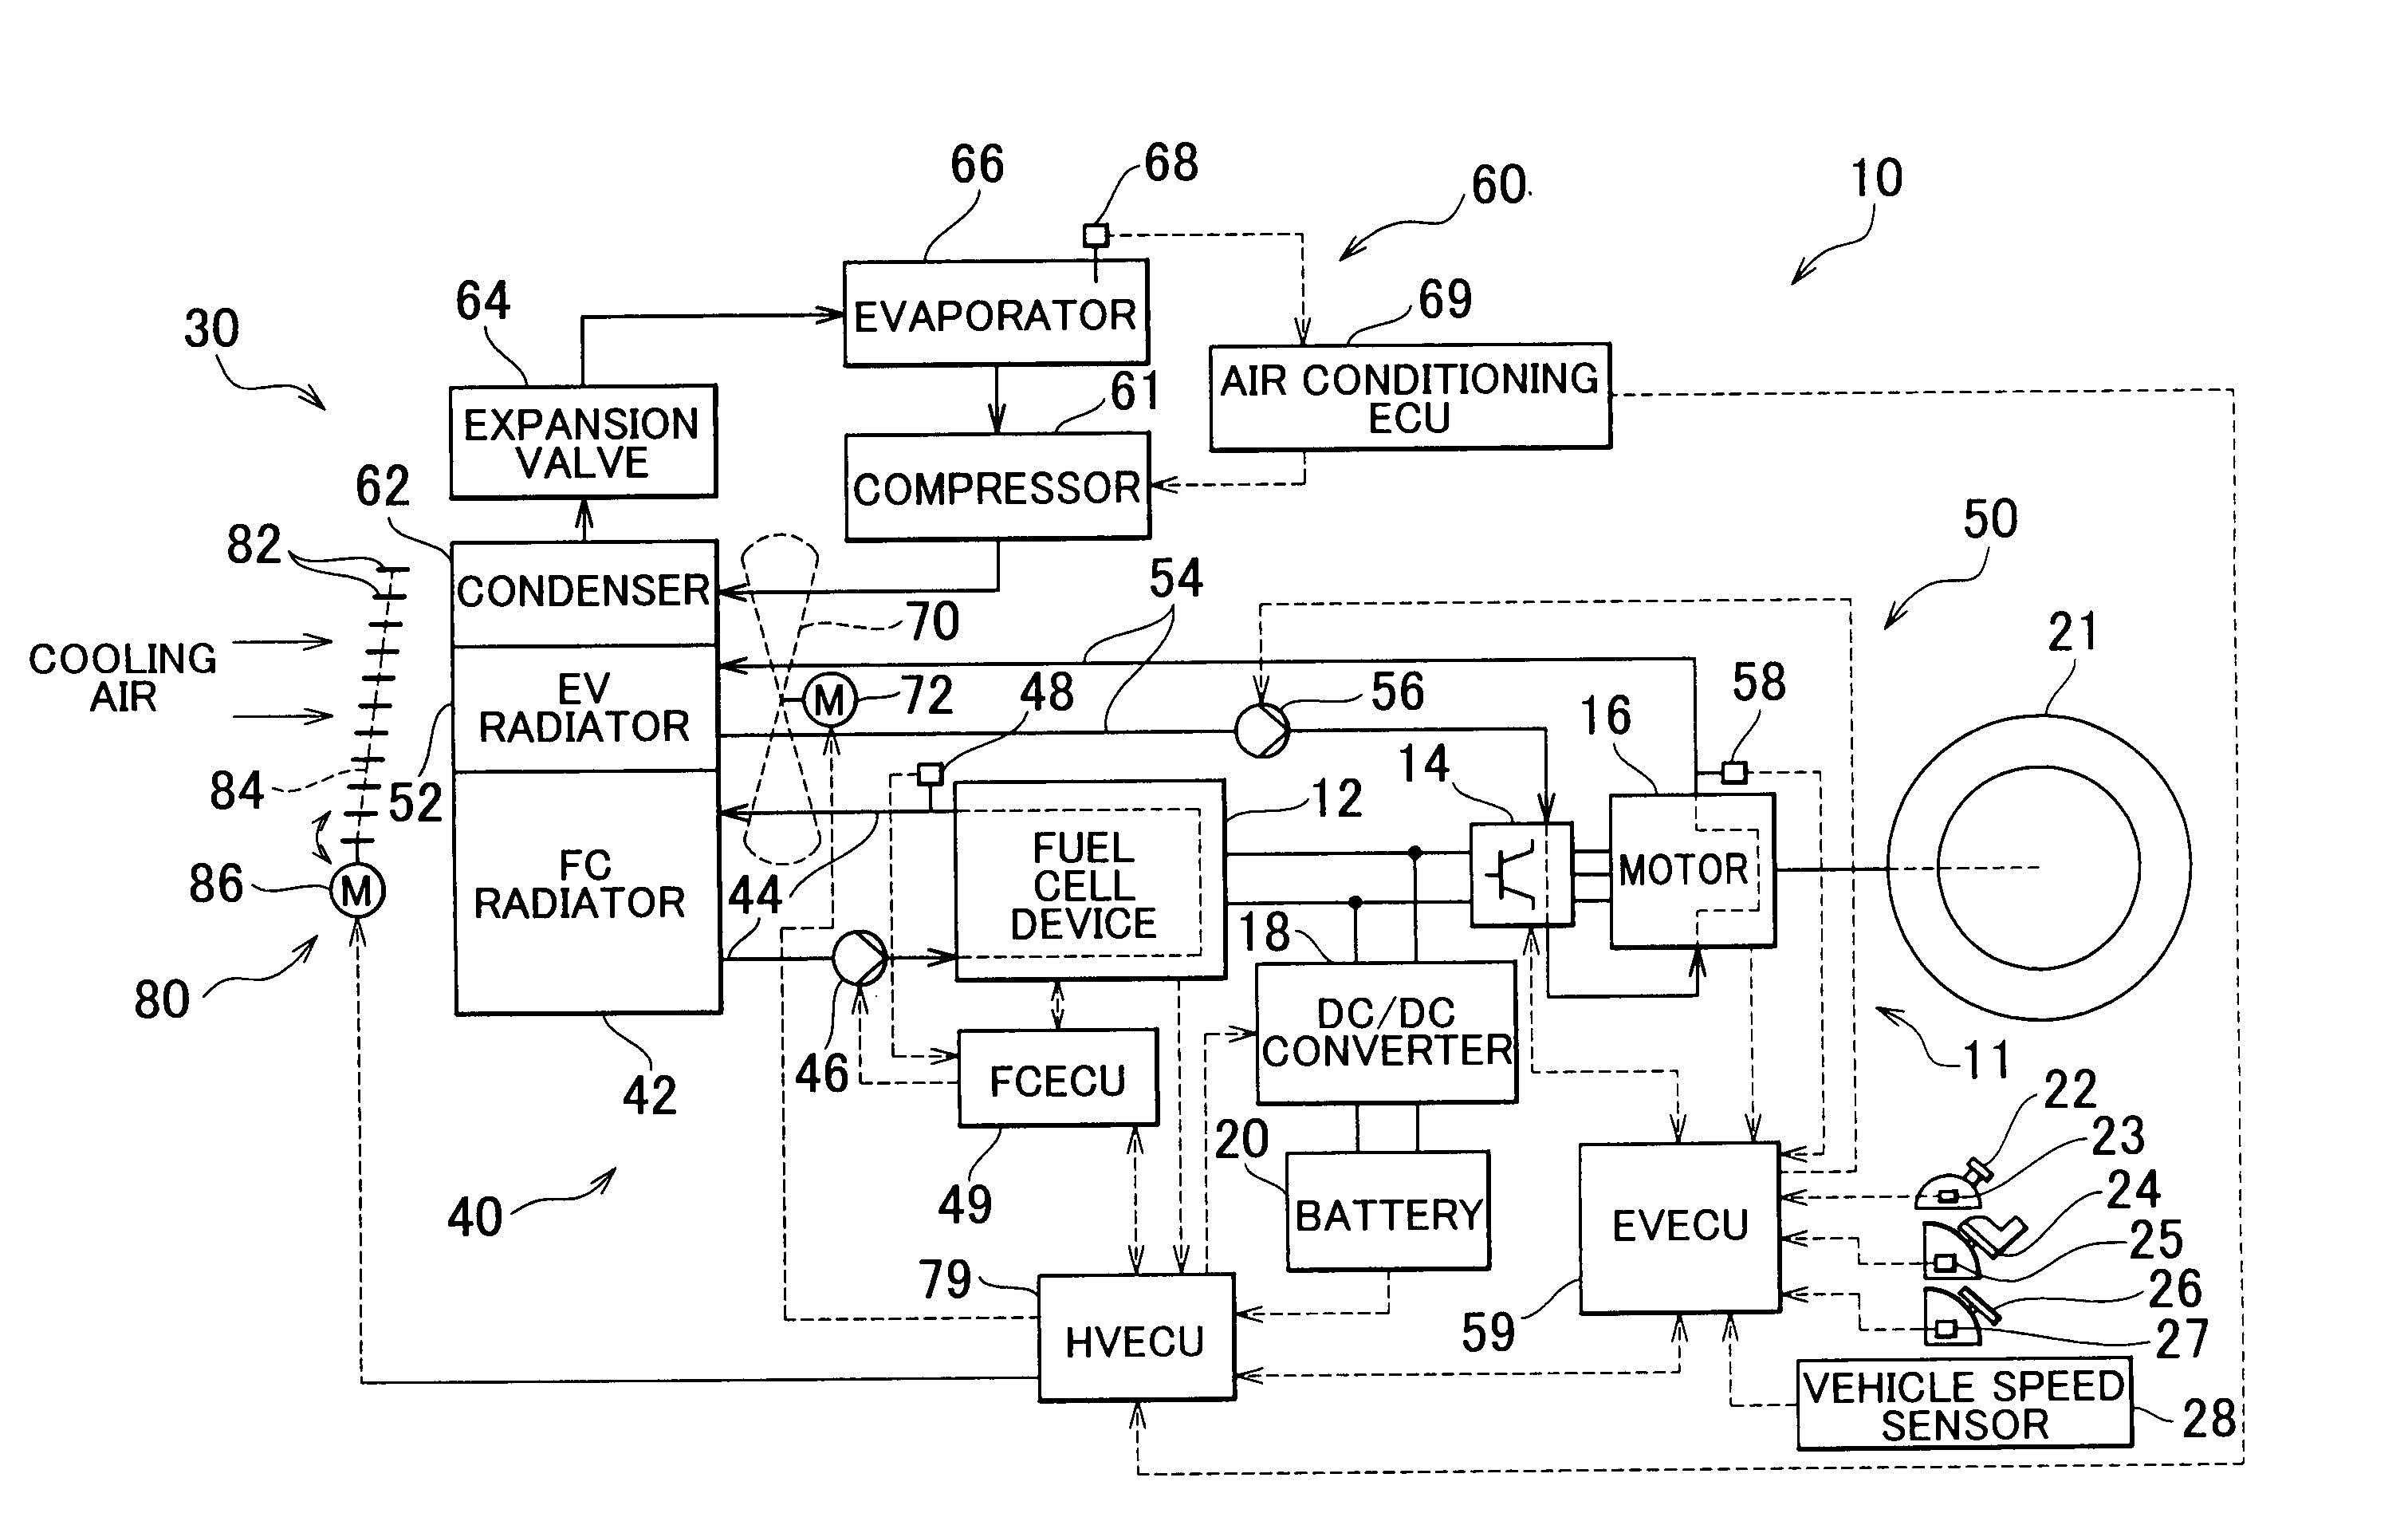 Cooling system and hybrid vehicle including cooling system